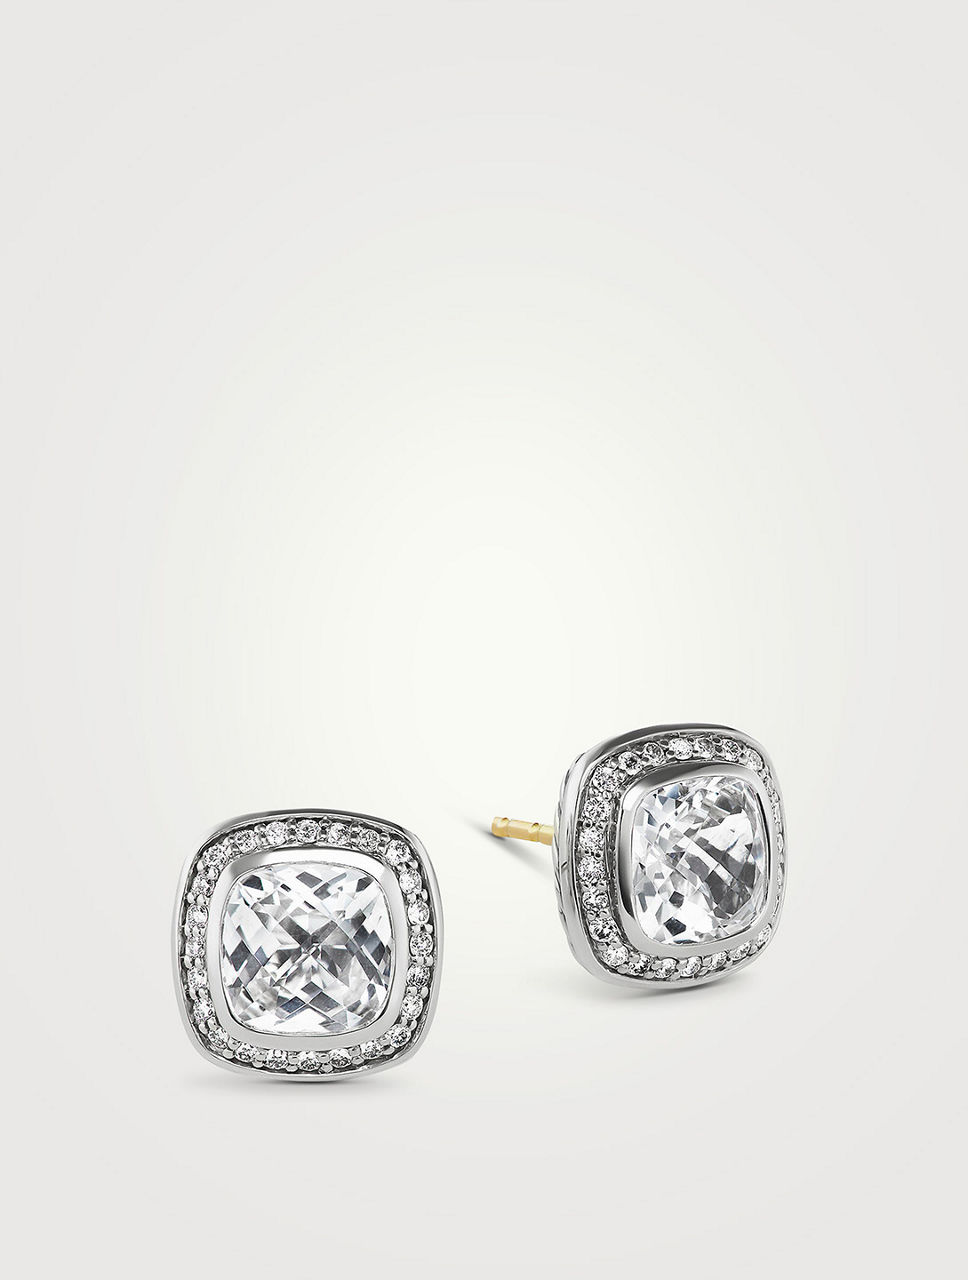 Albion® Stud Earrings In Sterling Silver With White Topaz And Pavé Diamonds